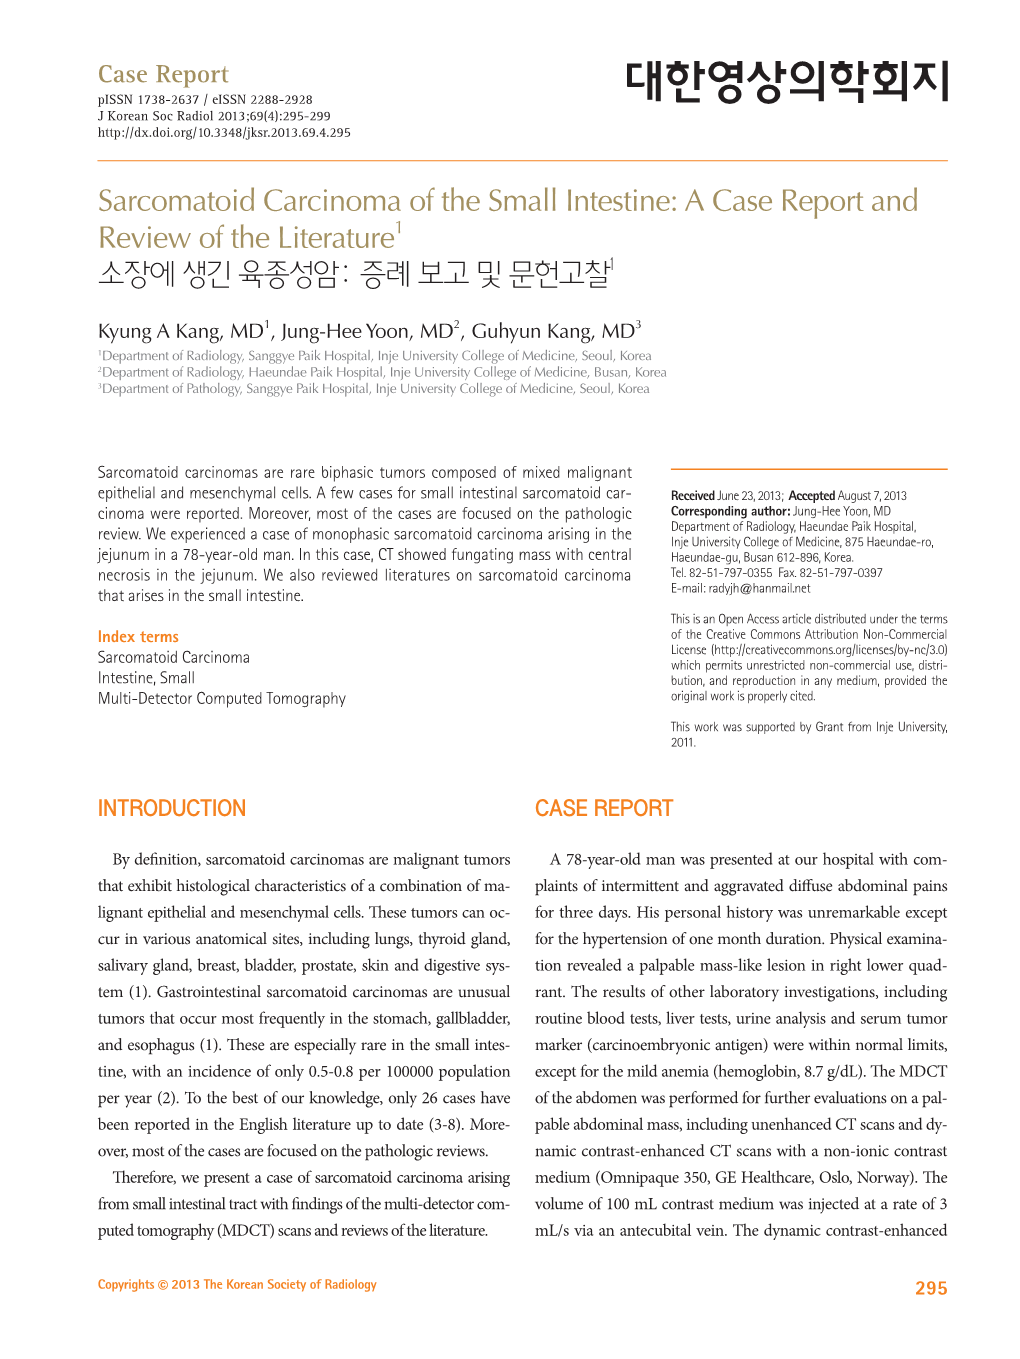 Sarcomatoid Carcinoma of the Small Intestine: a Case Report and Review of the Literature1 소장에 생긴 육종성암: 증례 보고 및 문헌고찰1